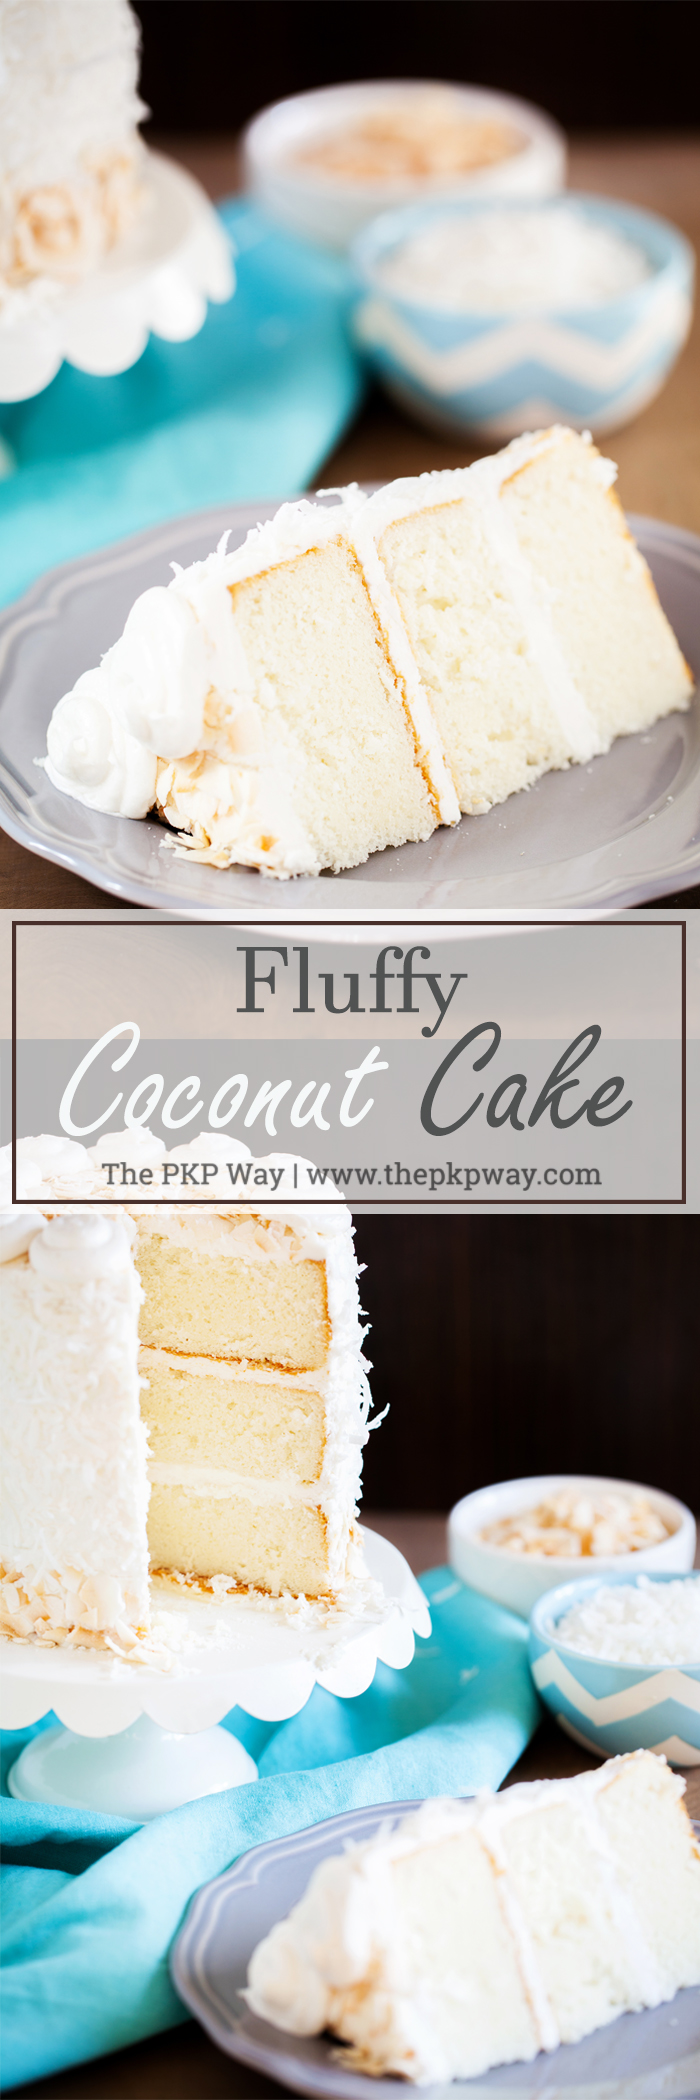 Fluffy Coconut Cake The Pkp Way,Granite Kitchen Islands With Seating